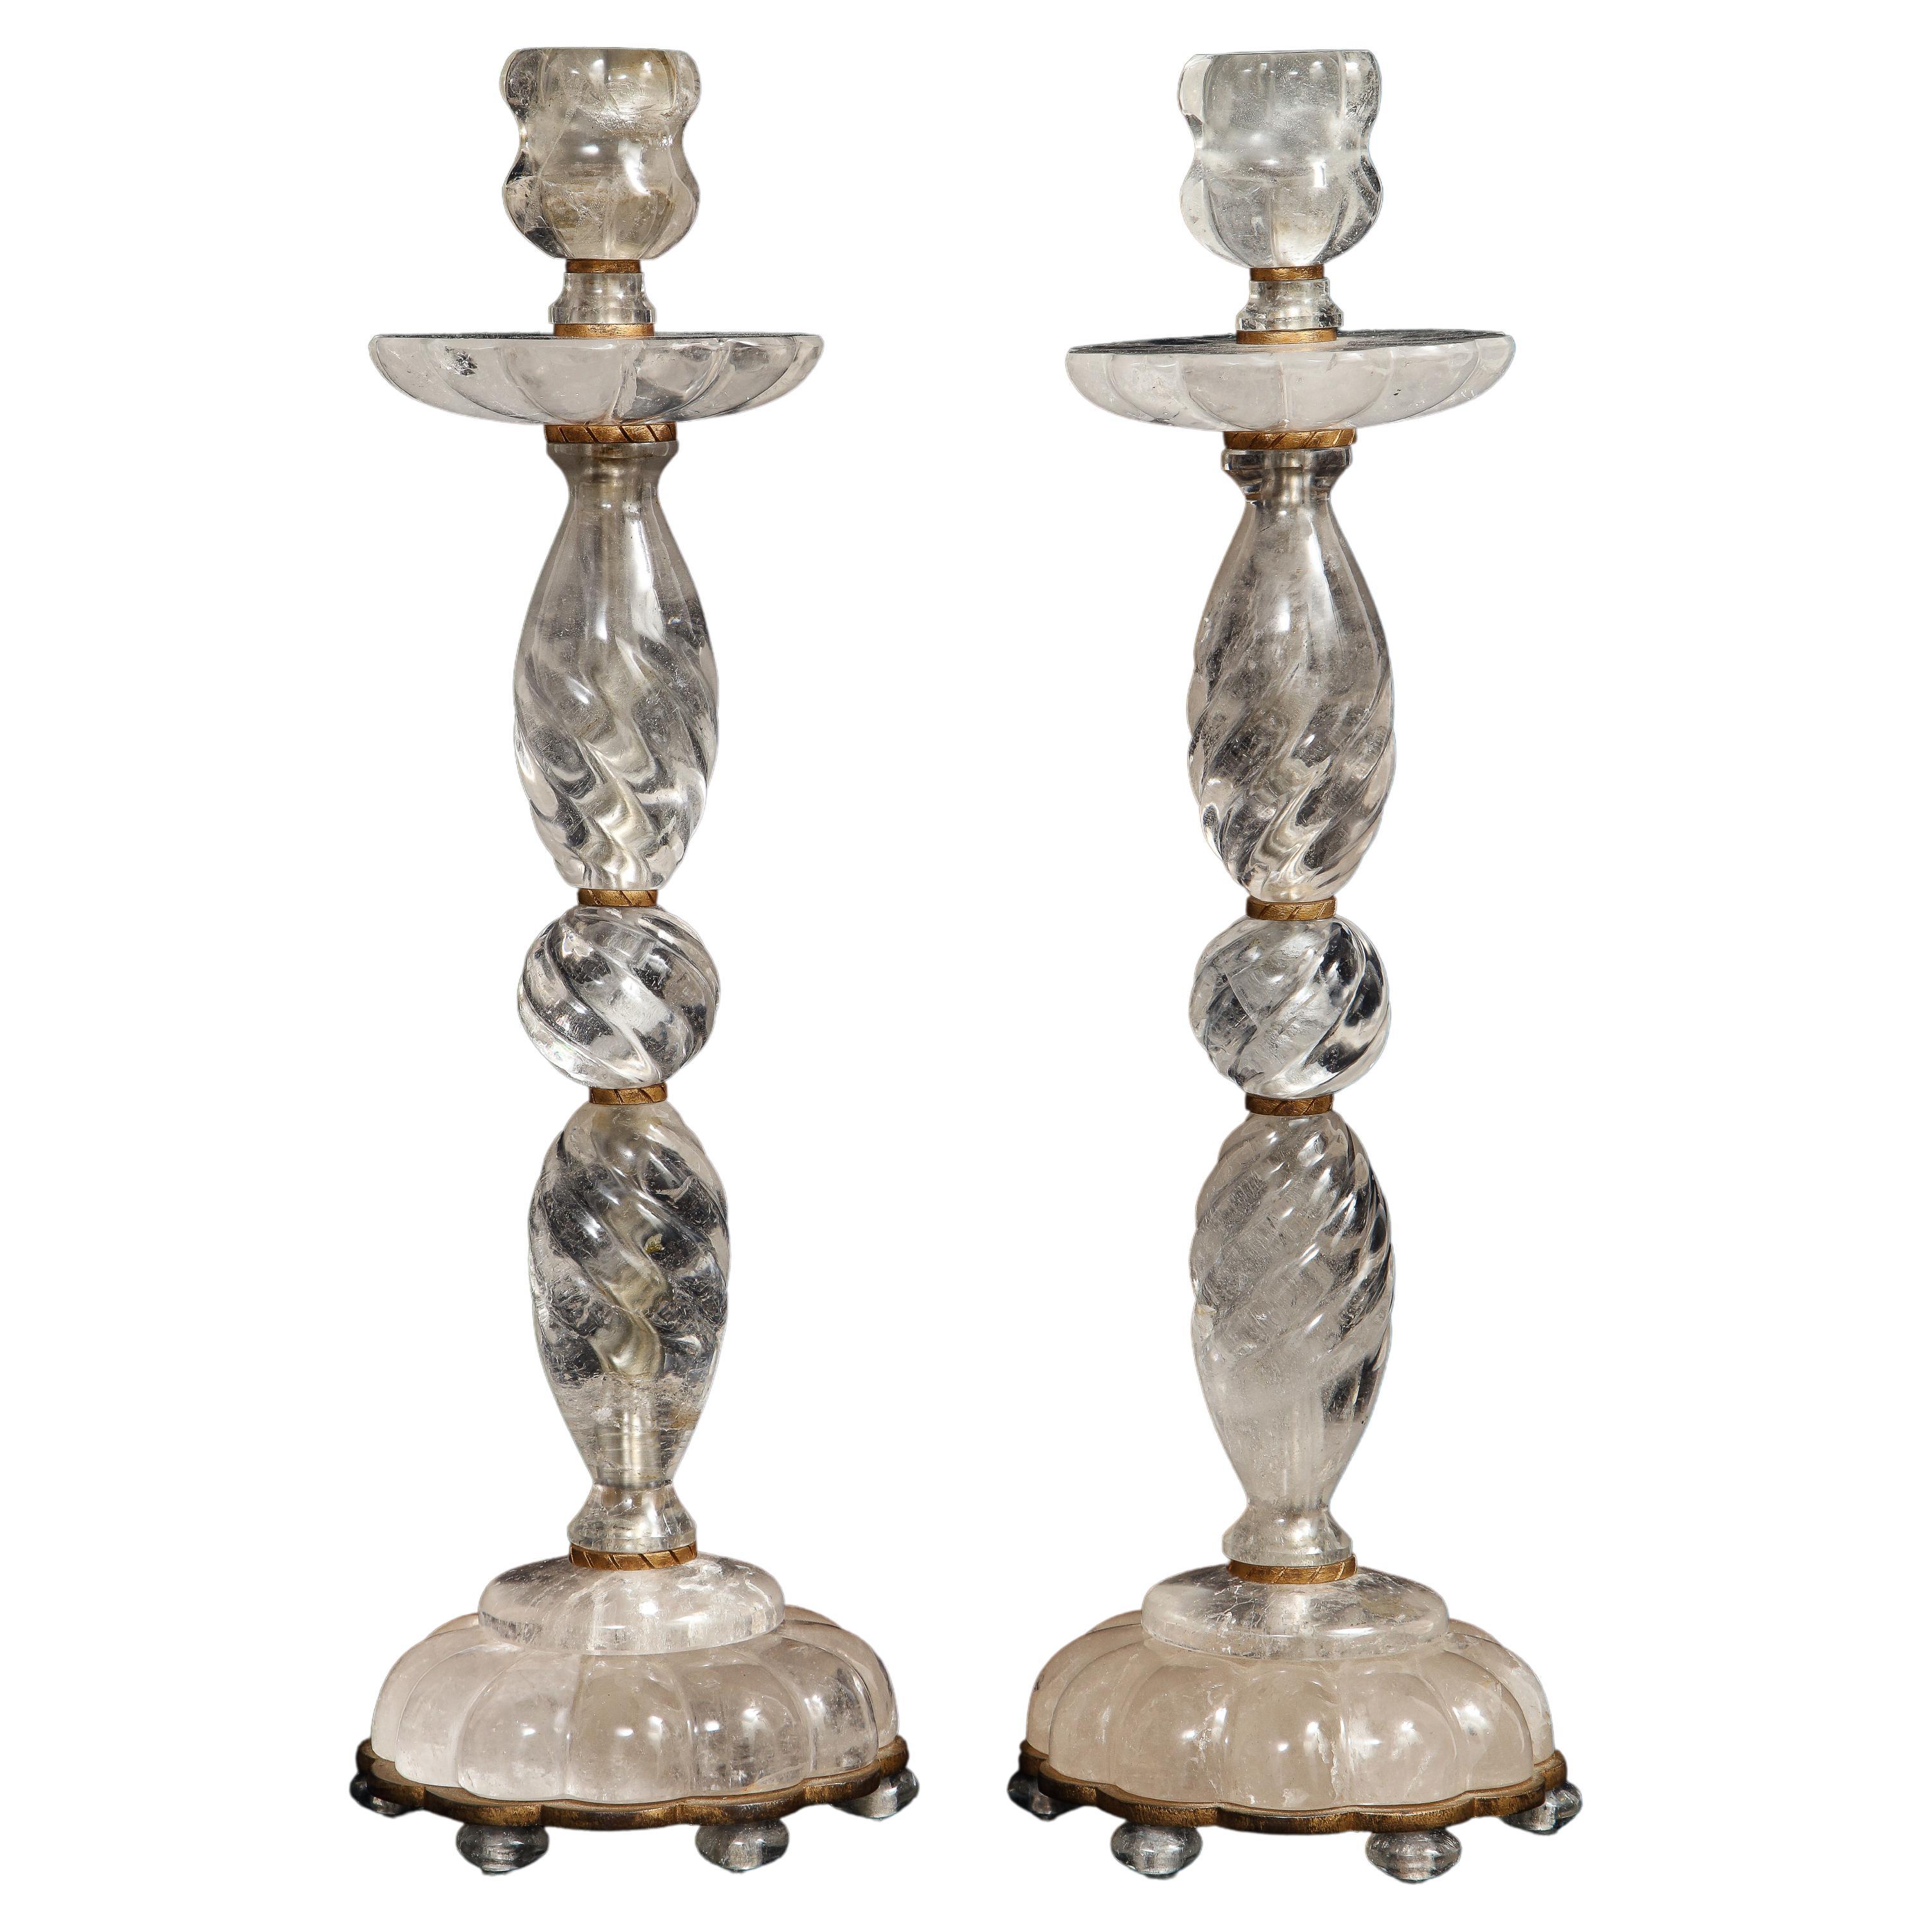 Pair of French Mid-Century Bronze Mounted Hand-Carved Rock Crystal Candlesticks